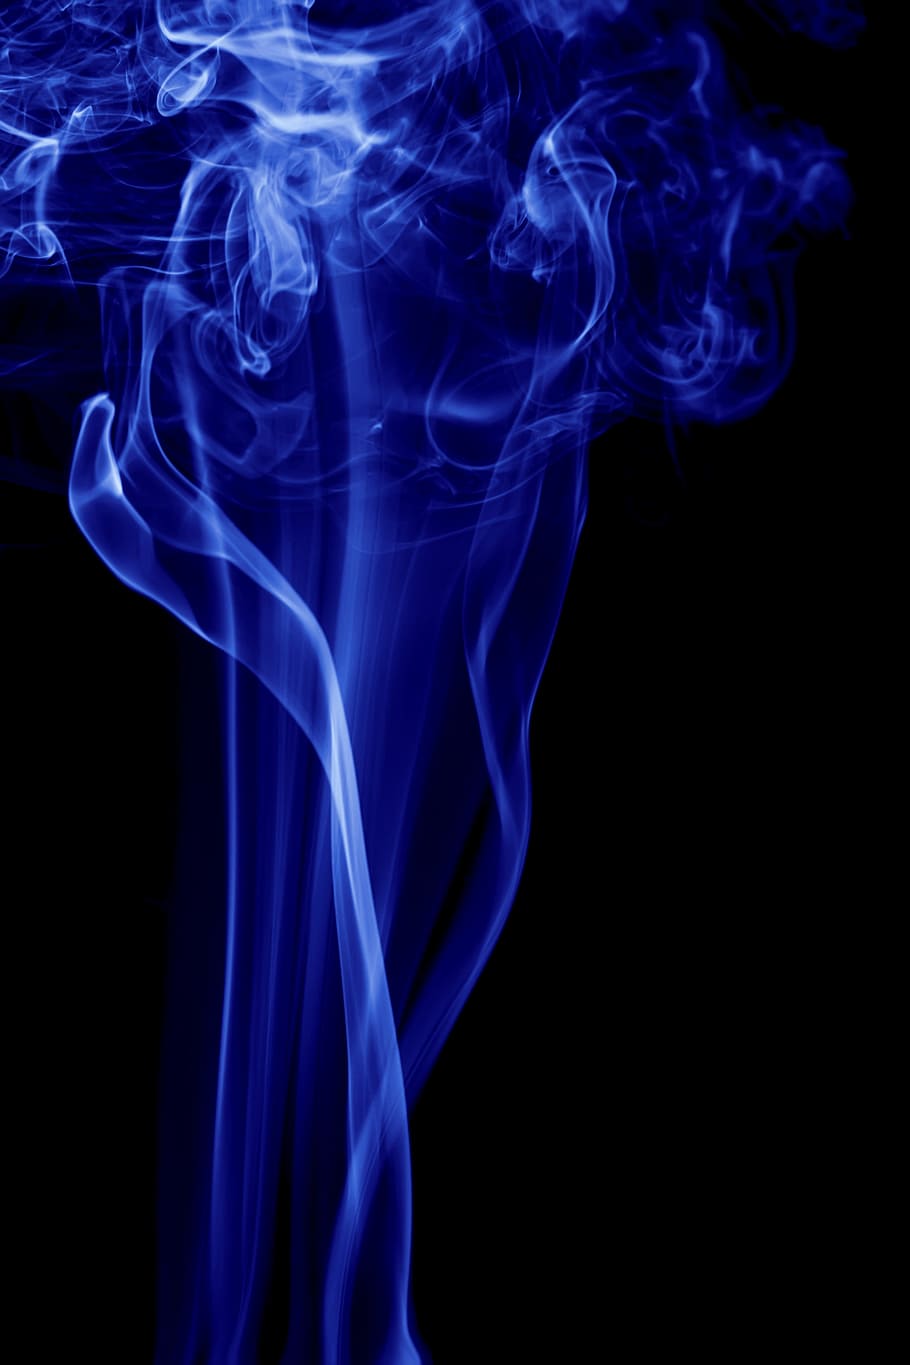 abstract, aroma, aromatherapy, background, color, smell, smoke, black background, studio shot, smoke - physical structure